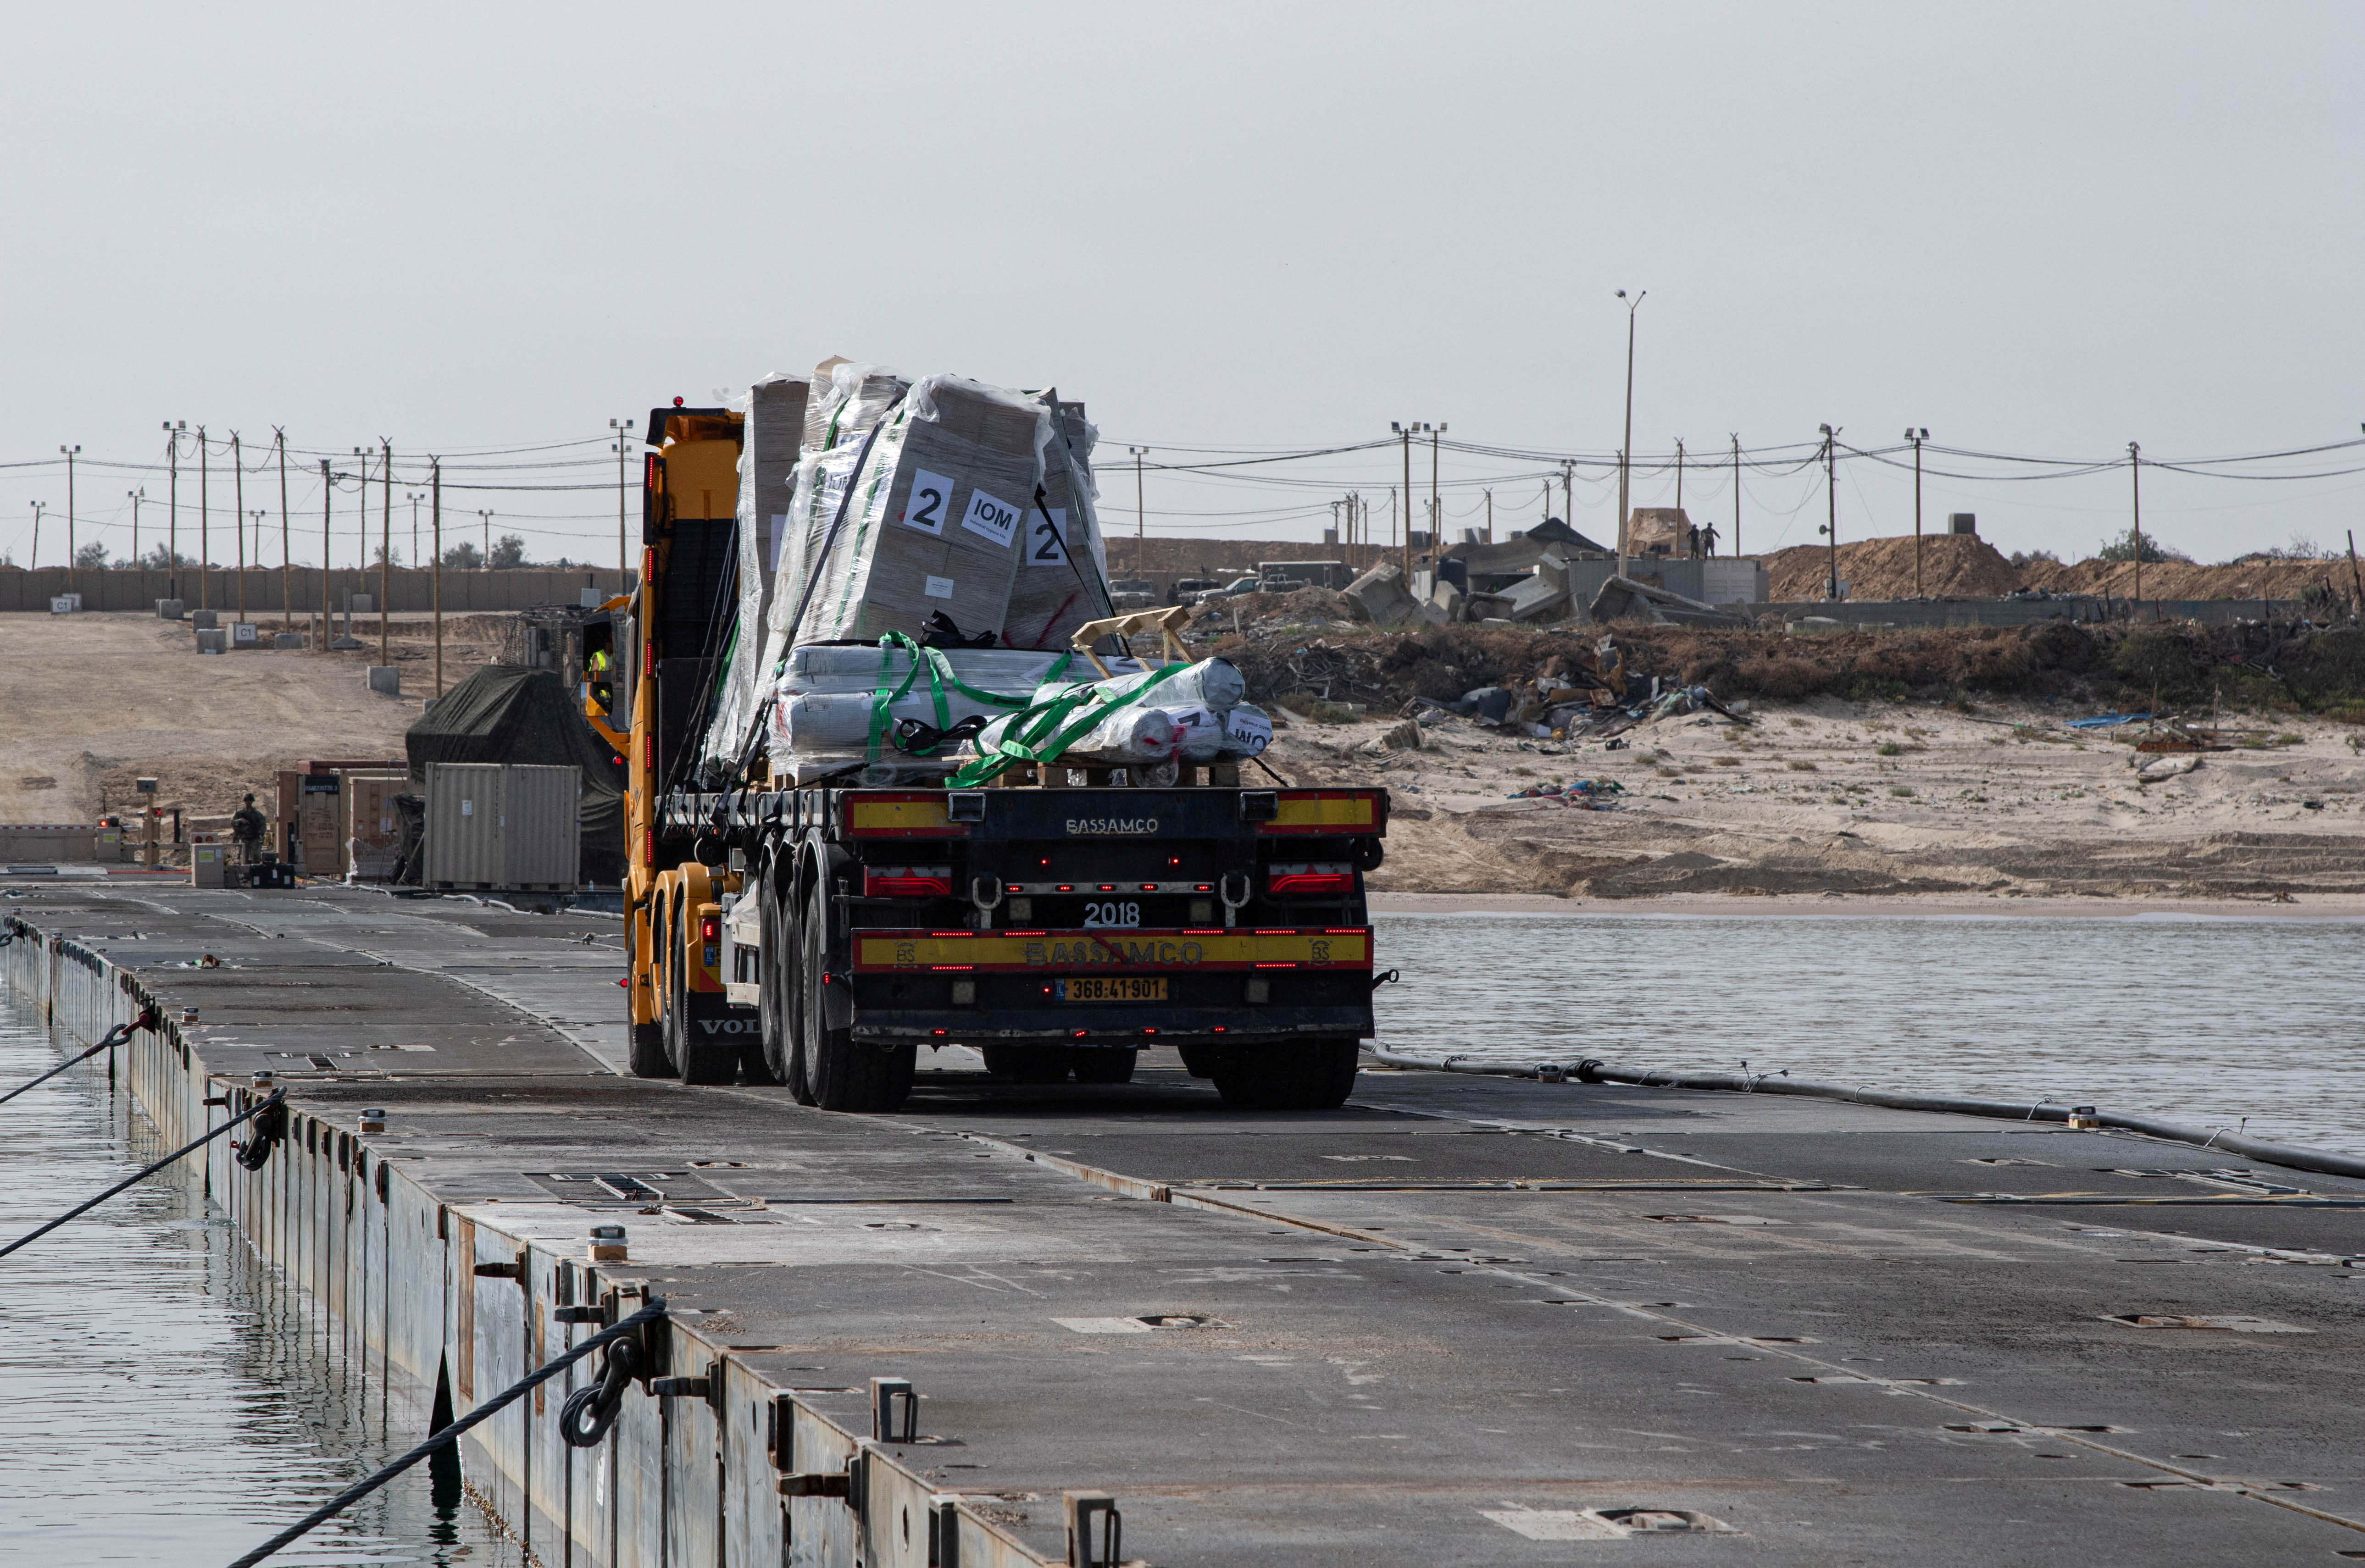 Trucks deliver humanitarian aid over a temporary pier on the Gaza coast